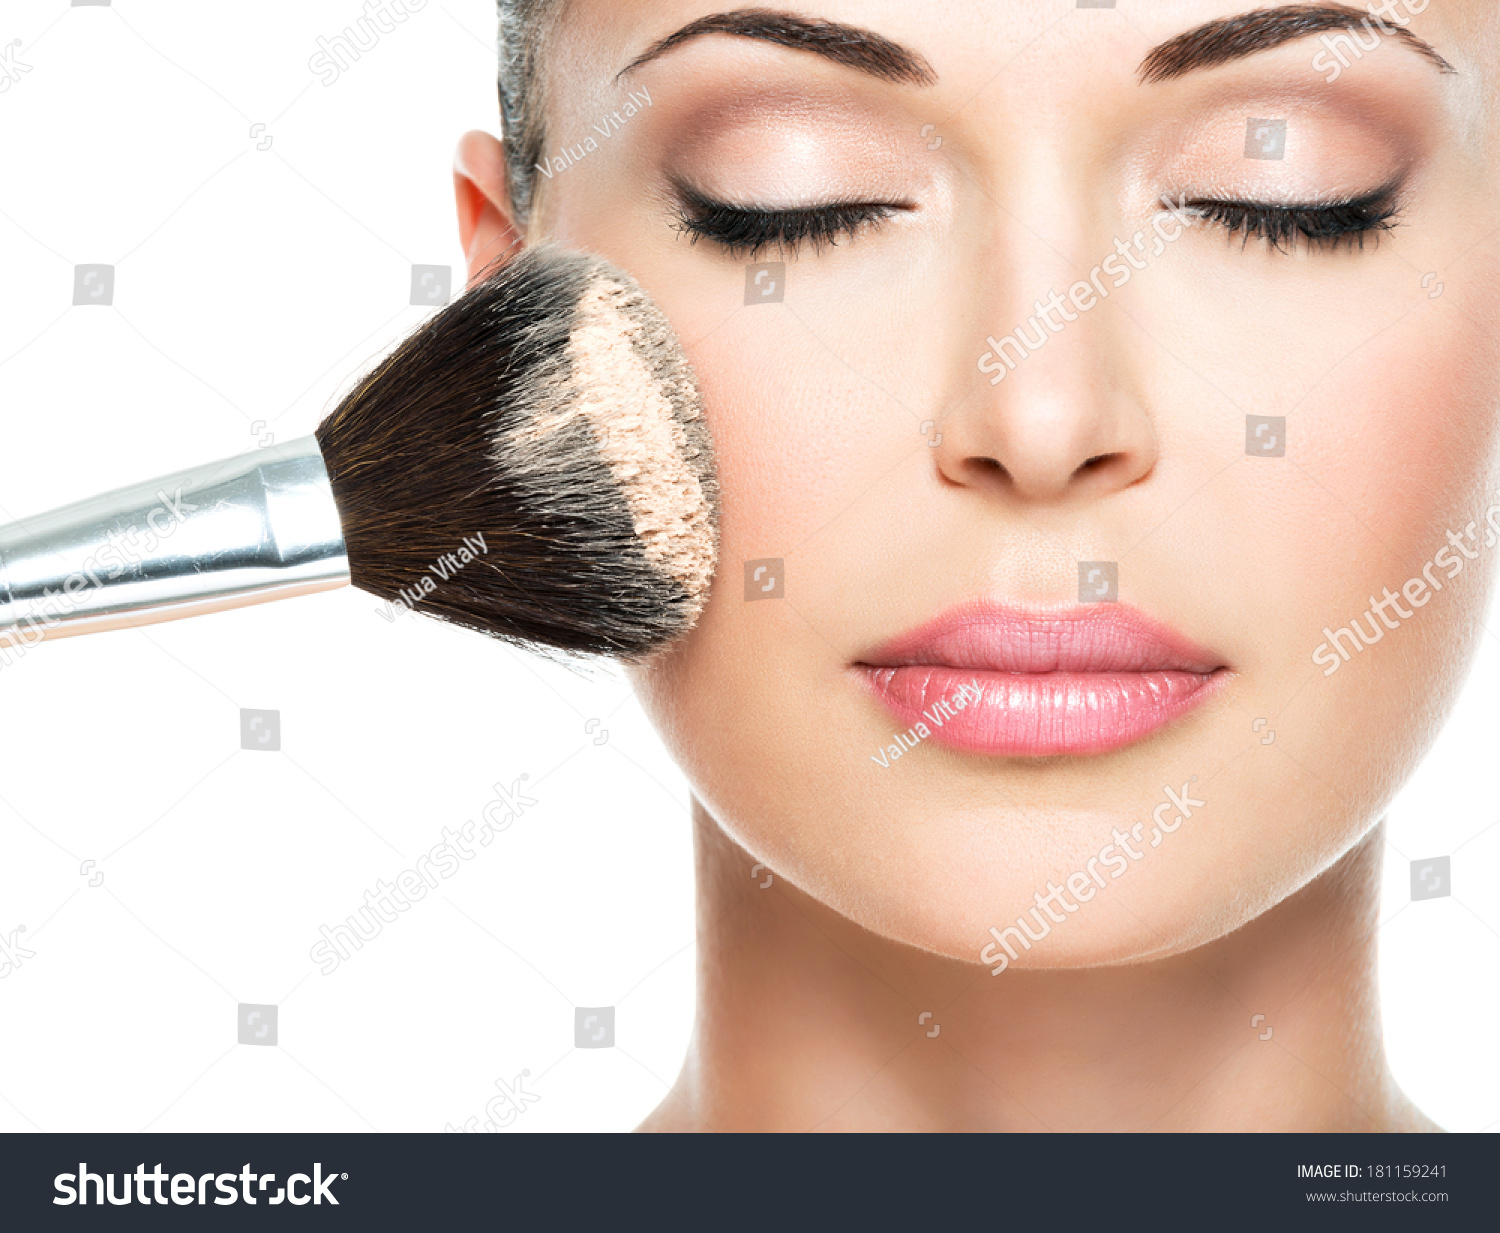 Closeup portrait of a woman  applying dry cosmetic tonal foundation  on the face using makeup brush.  #181159241